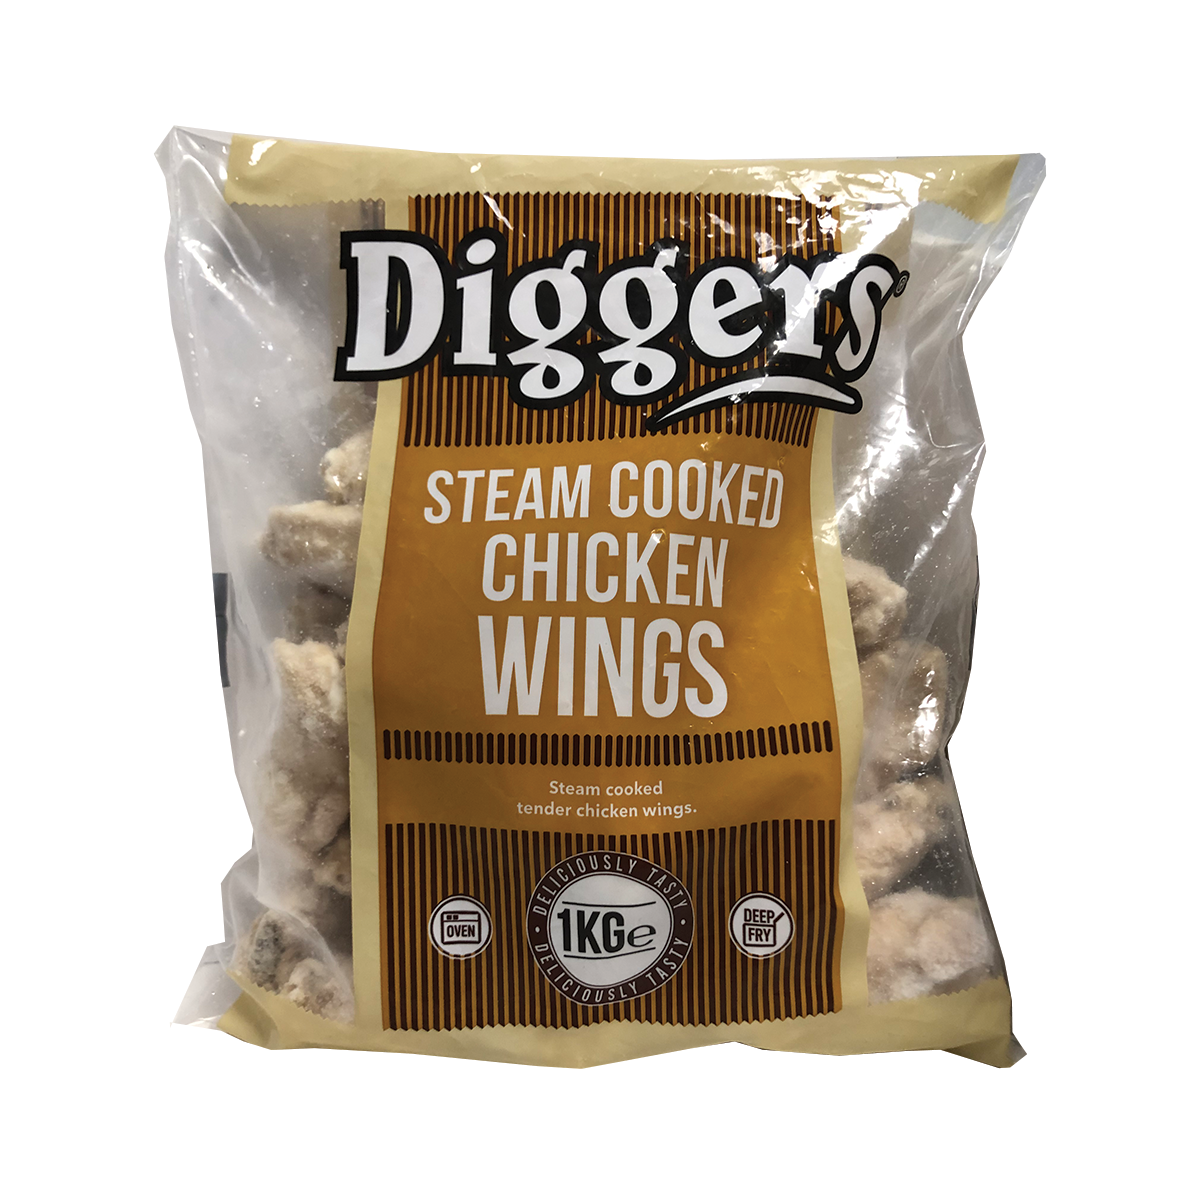 Diggers Steam Cooked Chicken Wings